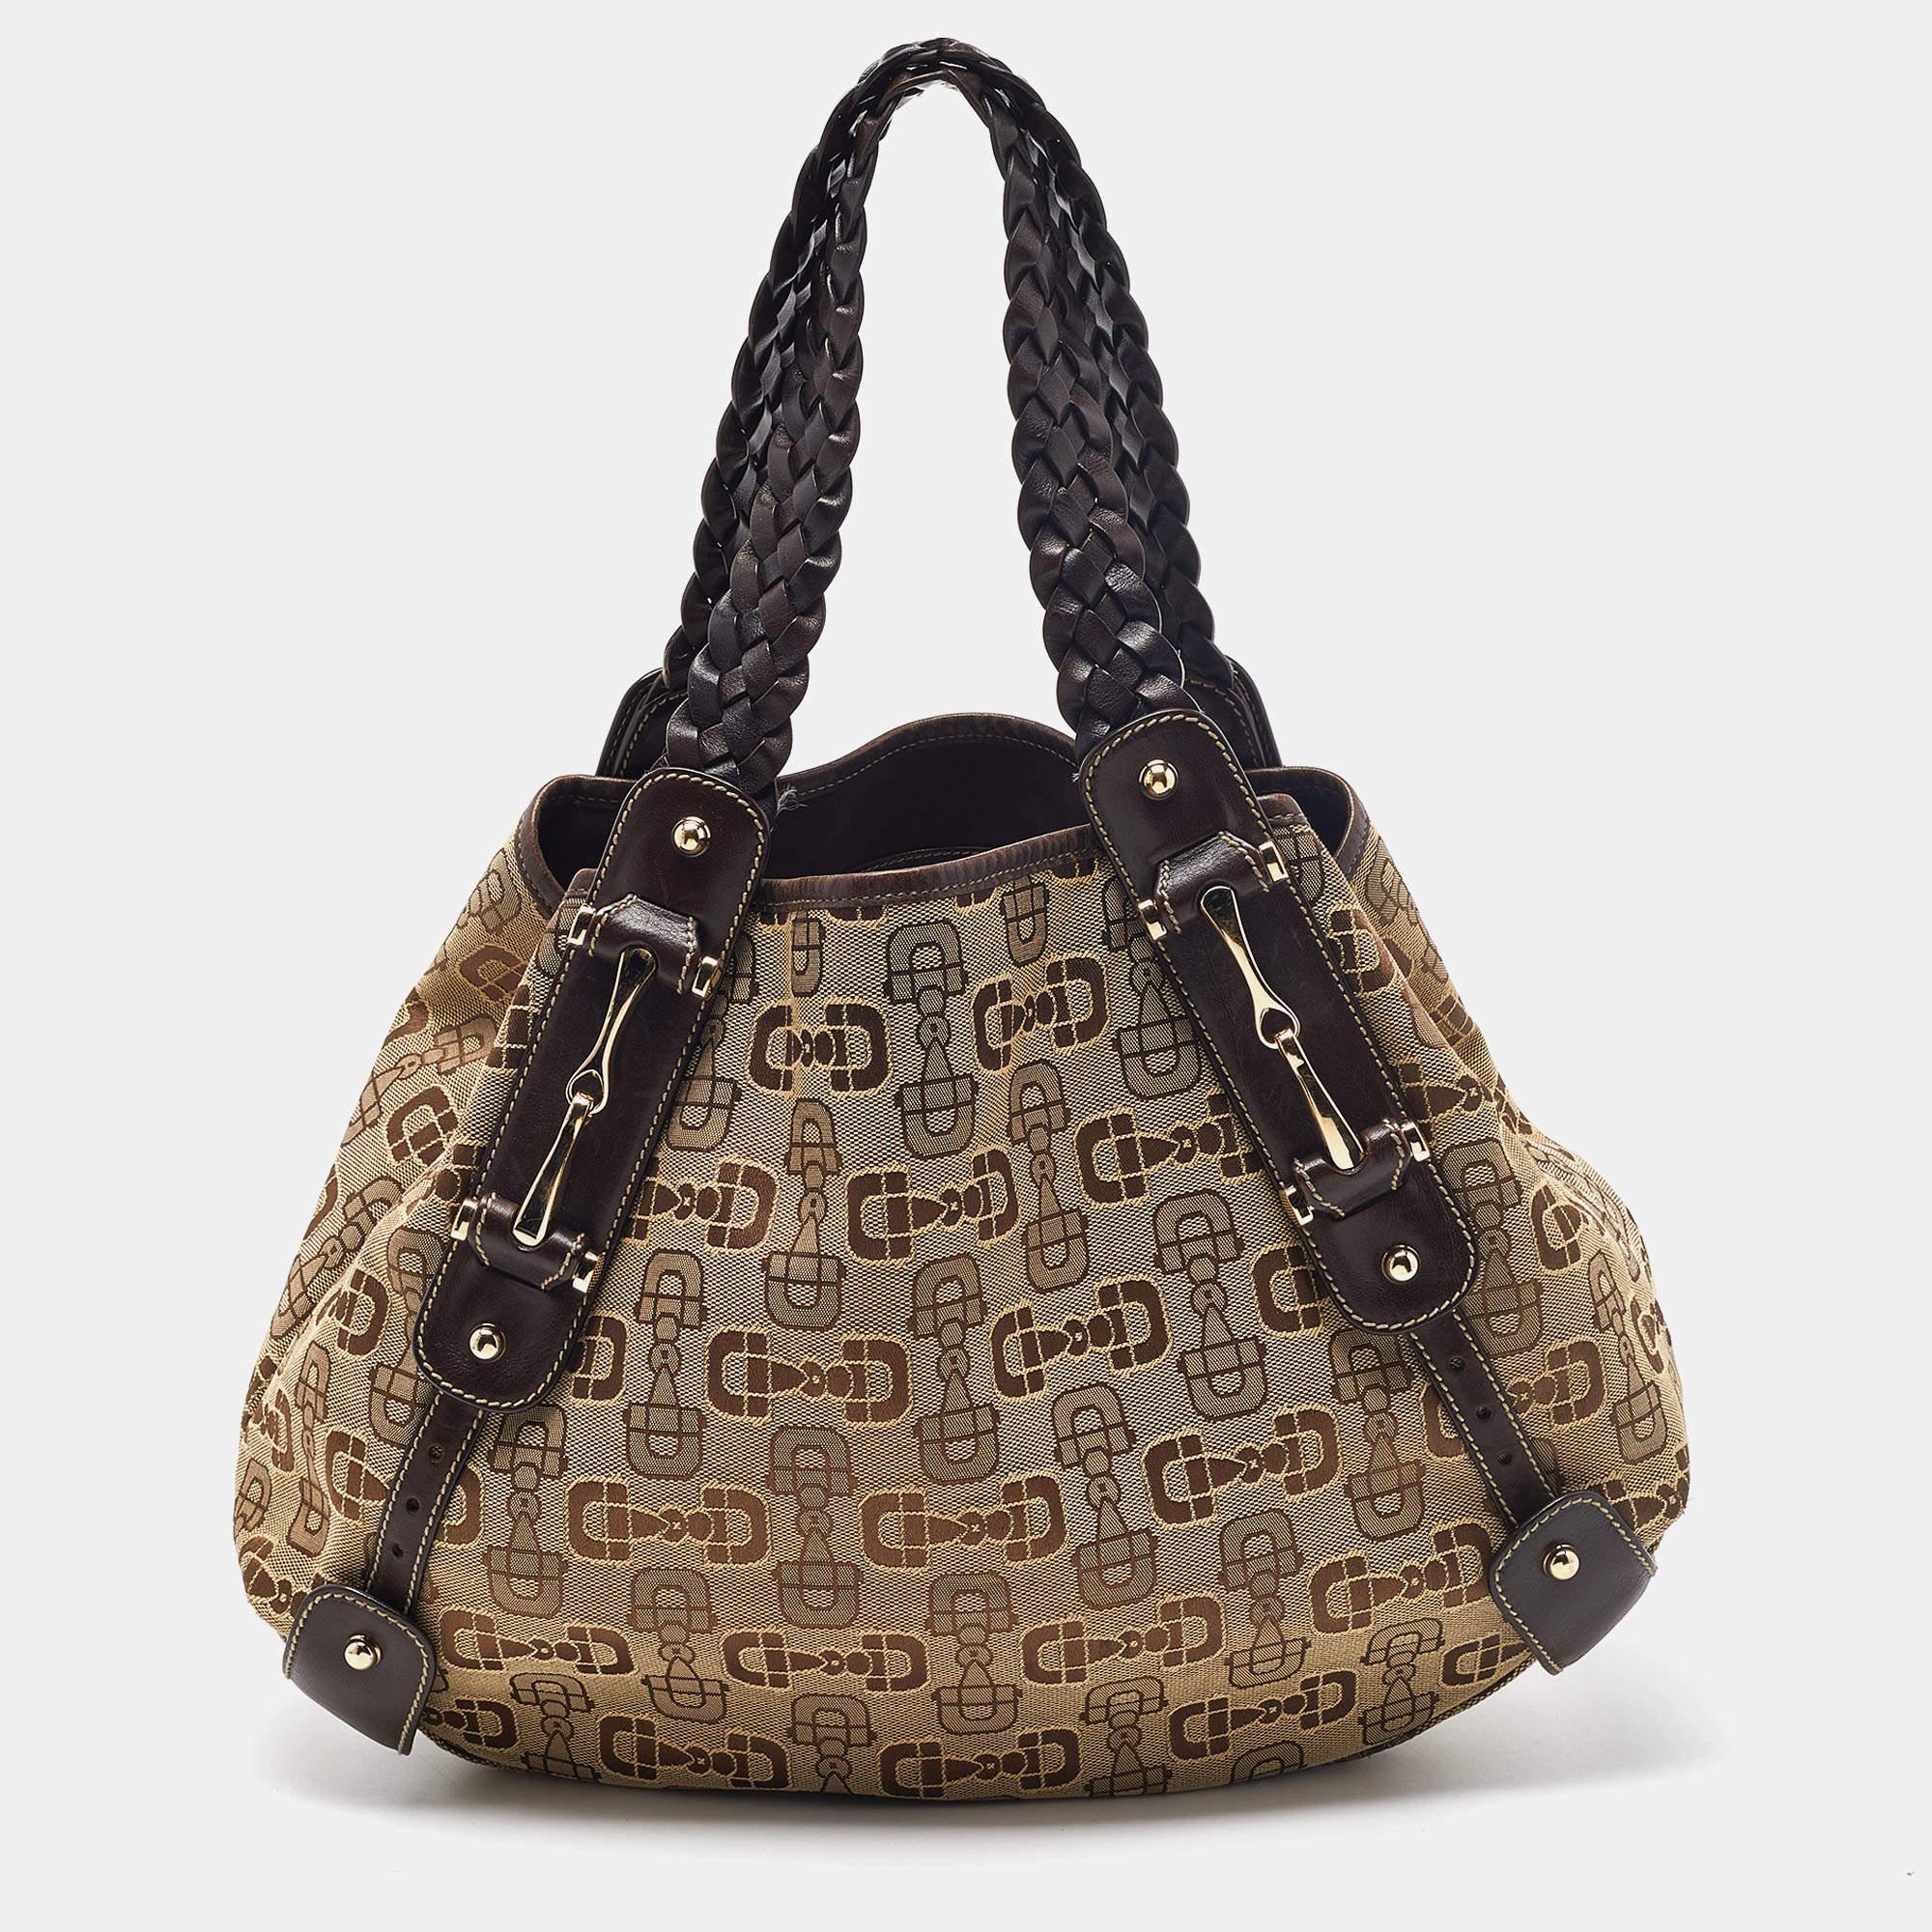 This Gucci Pelham bag for women comes fashioned with GG canvas and leather. It has a spacious size and durable construction. The designer bag is lined with fabric and held by two woven handles.

Includes: Original Dustbag

